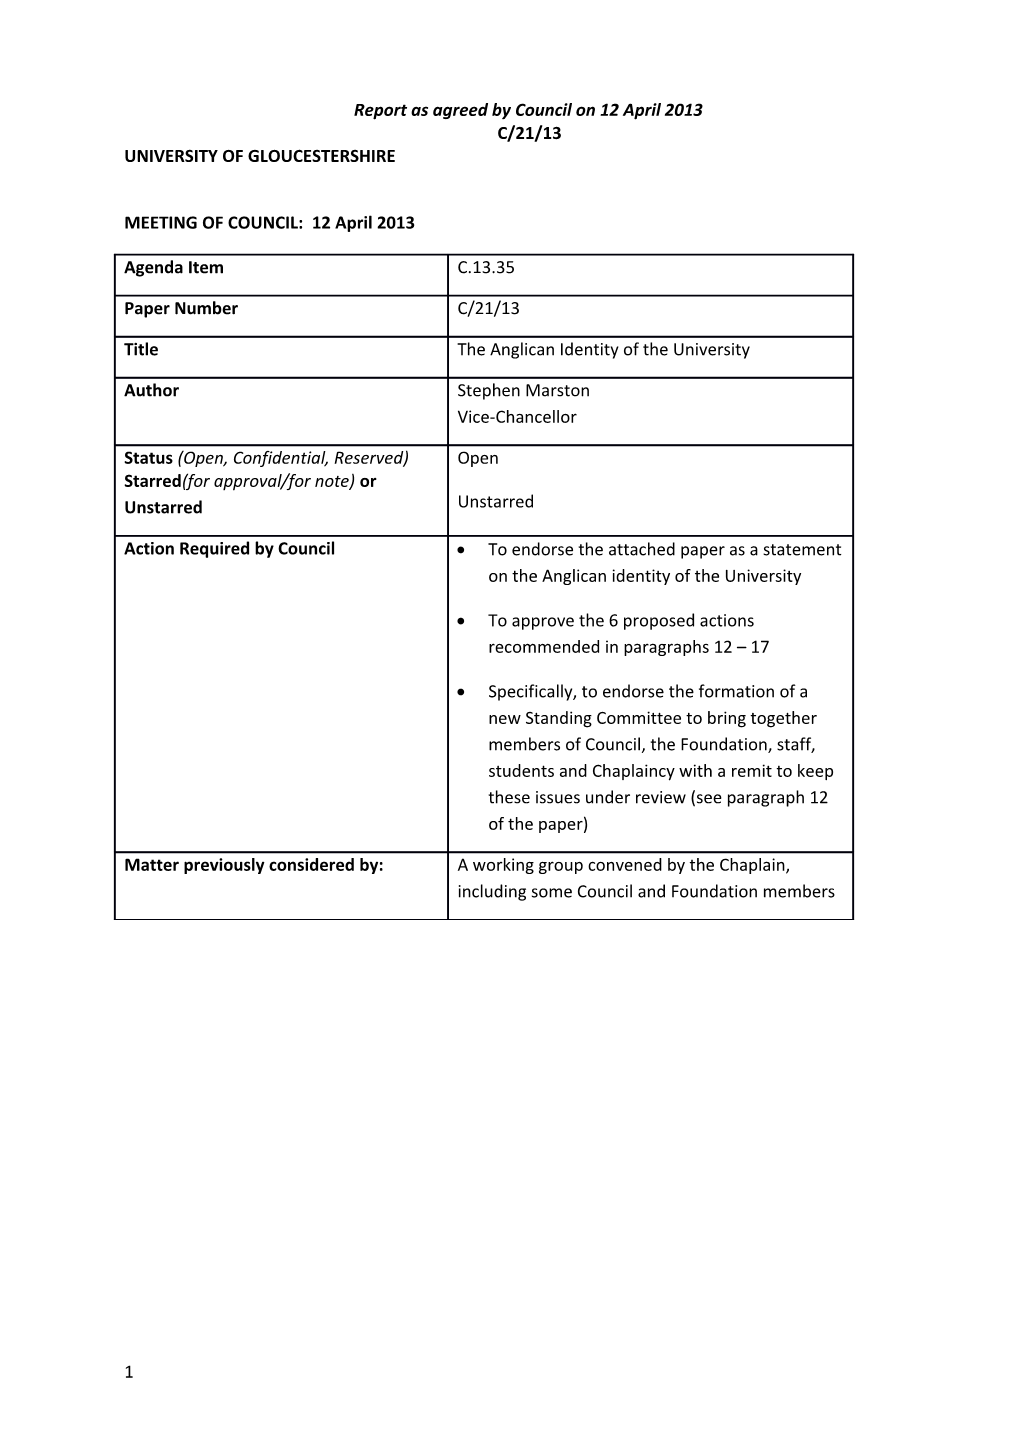 Report As Agreed by Council on 12 April 2013